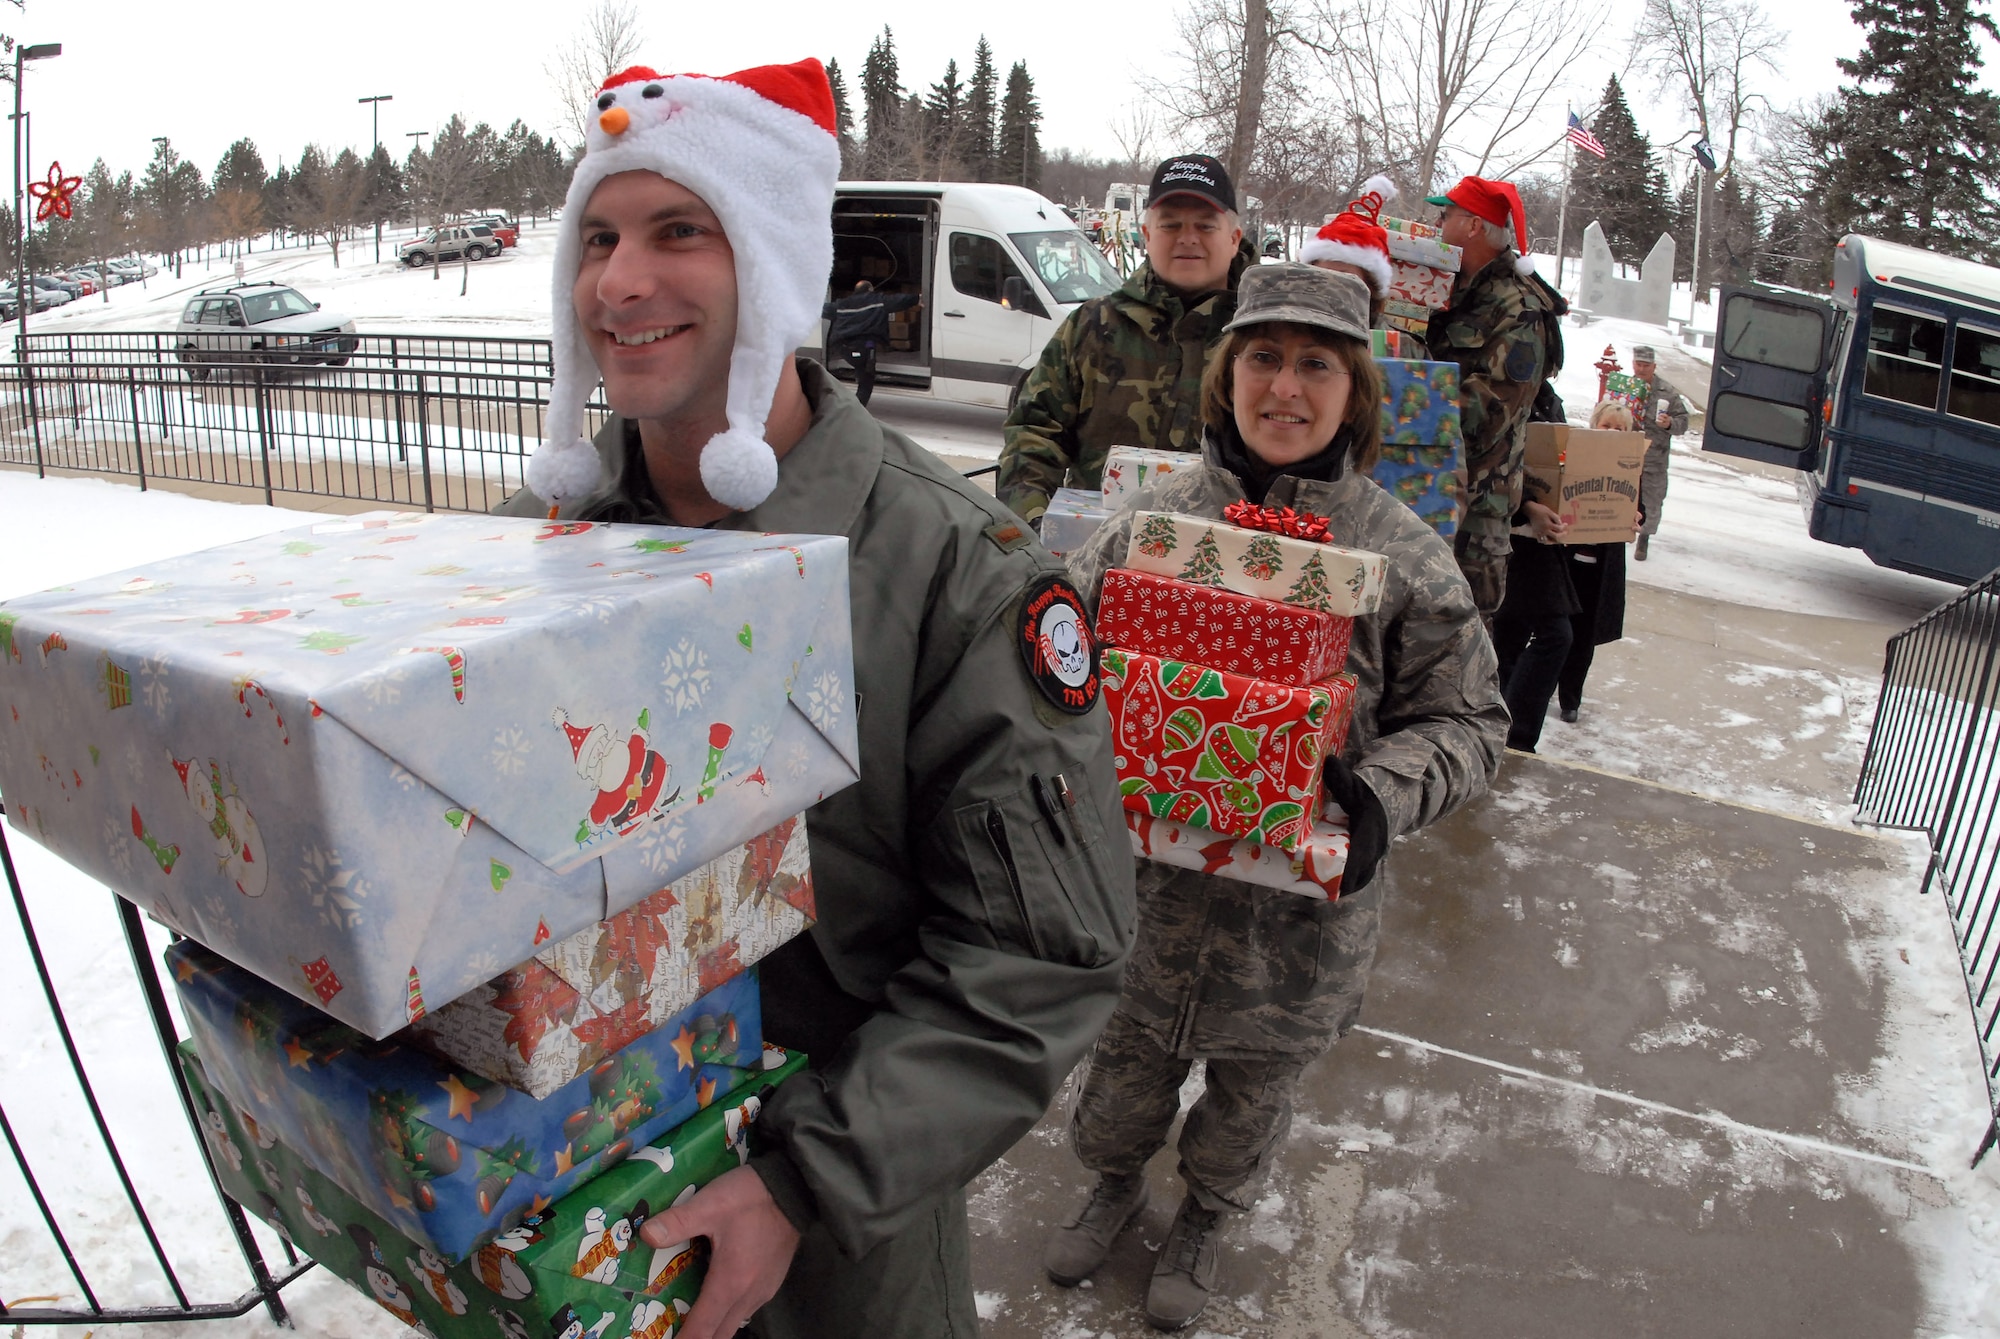 2nd Lt. Roy Thomsen and Chief Master Sgt. Paula Johnson carry Christmas gifts into the North Dakota Veteran's Nursing Home Dec. 10 in Lisbon, N.D. The gifts are given to veterans at the nursing home by the North Dakota Air and Army National Guard each December using funds raised through personal donations given by the North Dakota National Guard members. Lieutenant Thomsen and Chief Johnson are North Dakota Air National Guard members. (U.S. Air Force photo/Senior Master Sgt. David H. Lipp) 